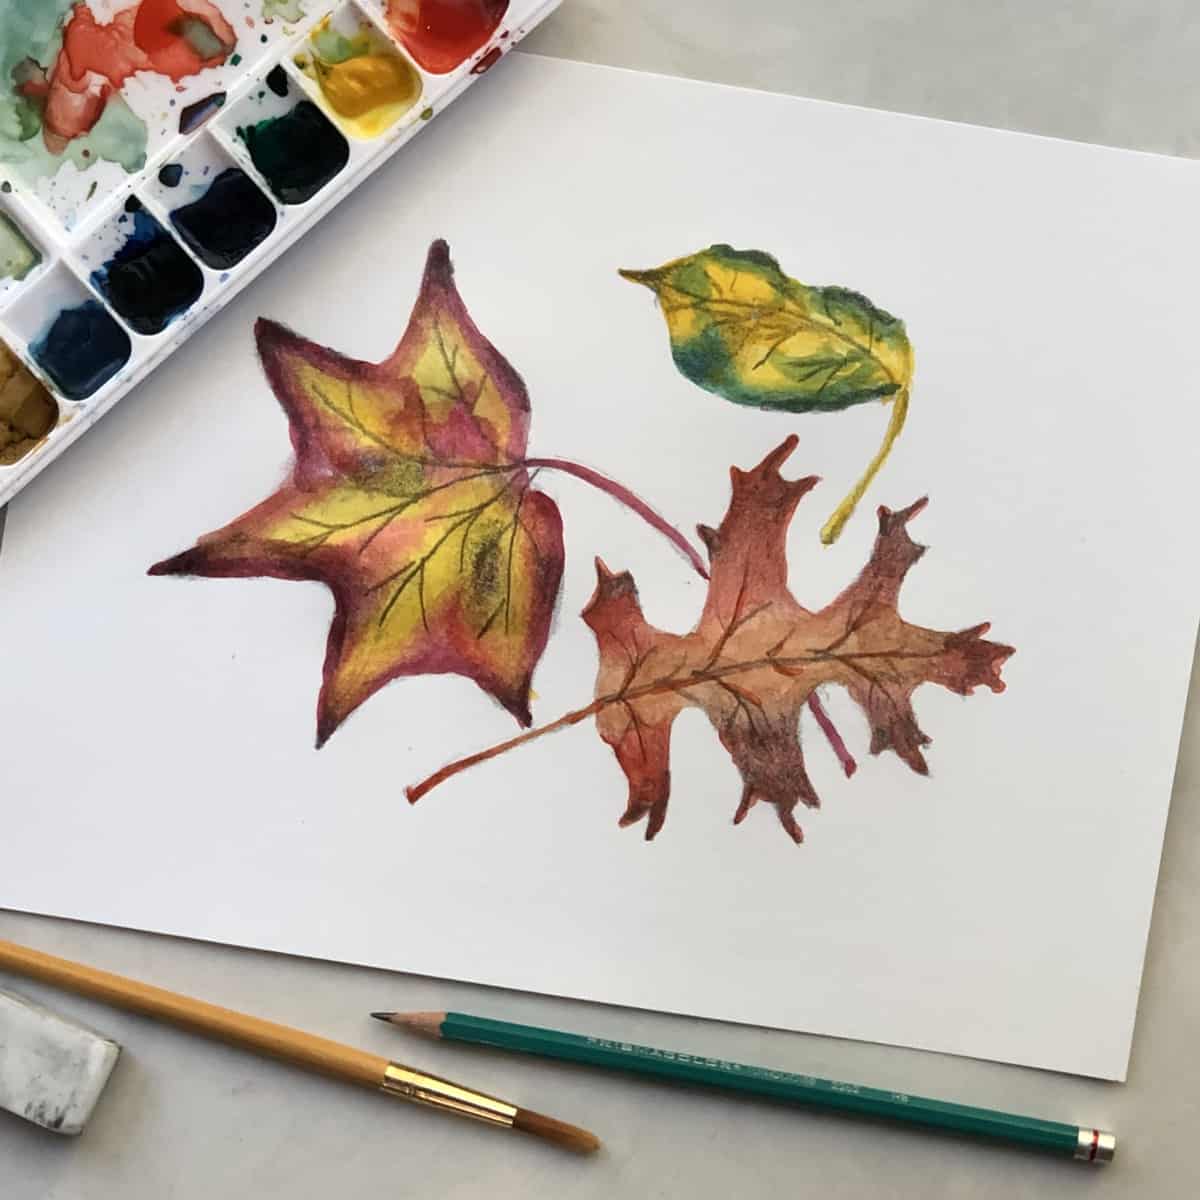 Colorful drawing of fall leaves colored with watercolor paints on paper next to a paintbrush, drawing pencil, eraser, and a watercolor paint set.